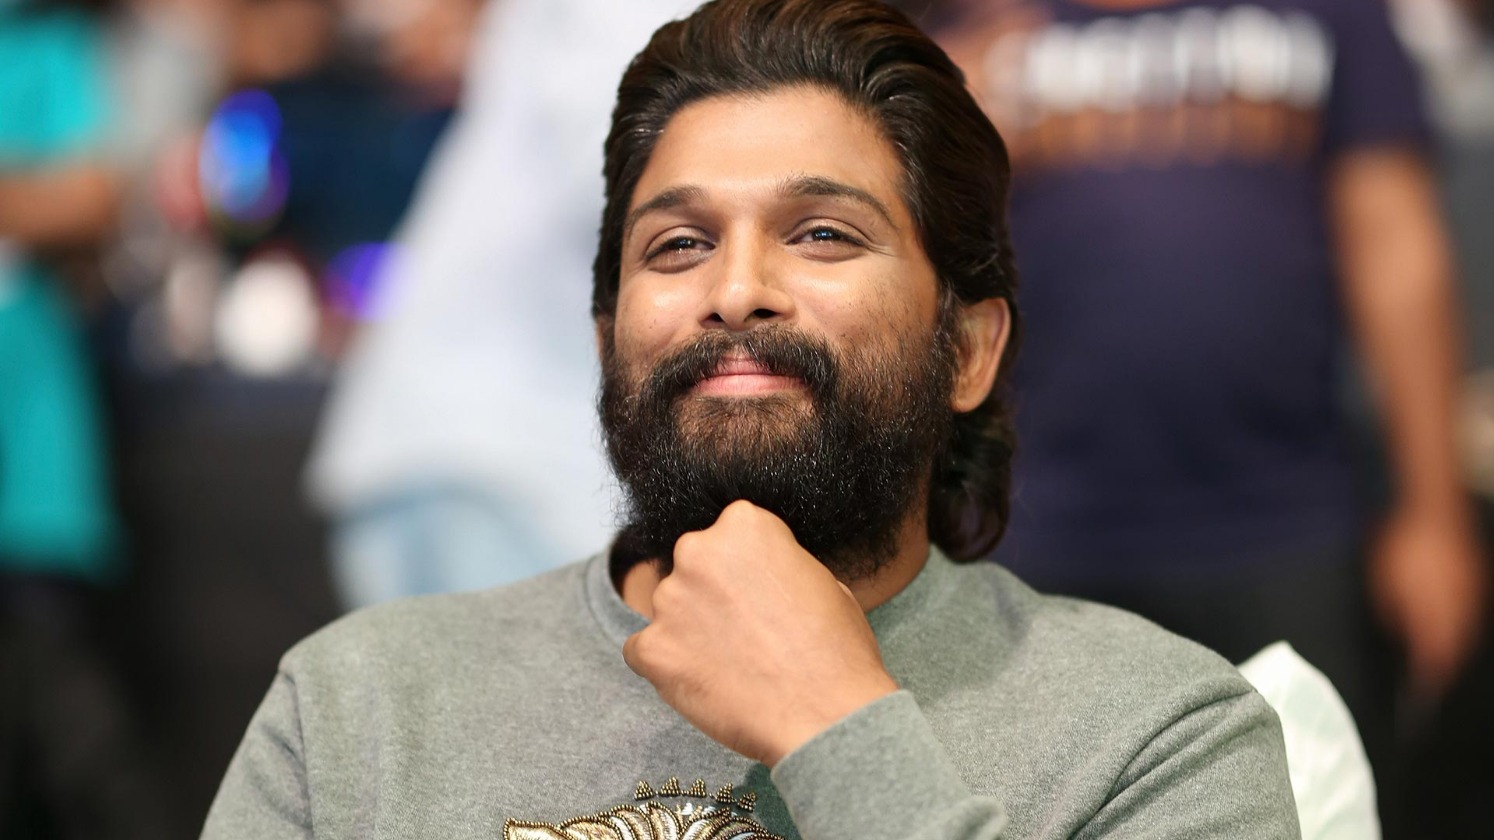 After Pushpa Allu Arjun says he'll 'hopefully soon' make his Bollywood debut, not interested in playing second fiddle